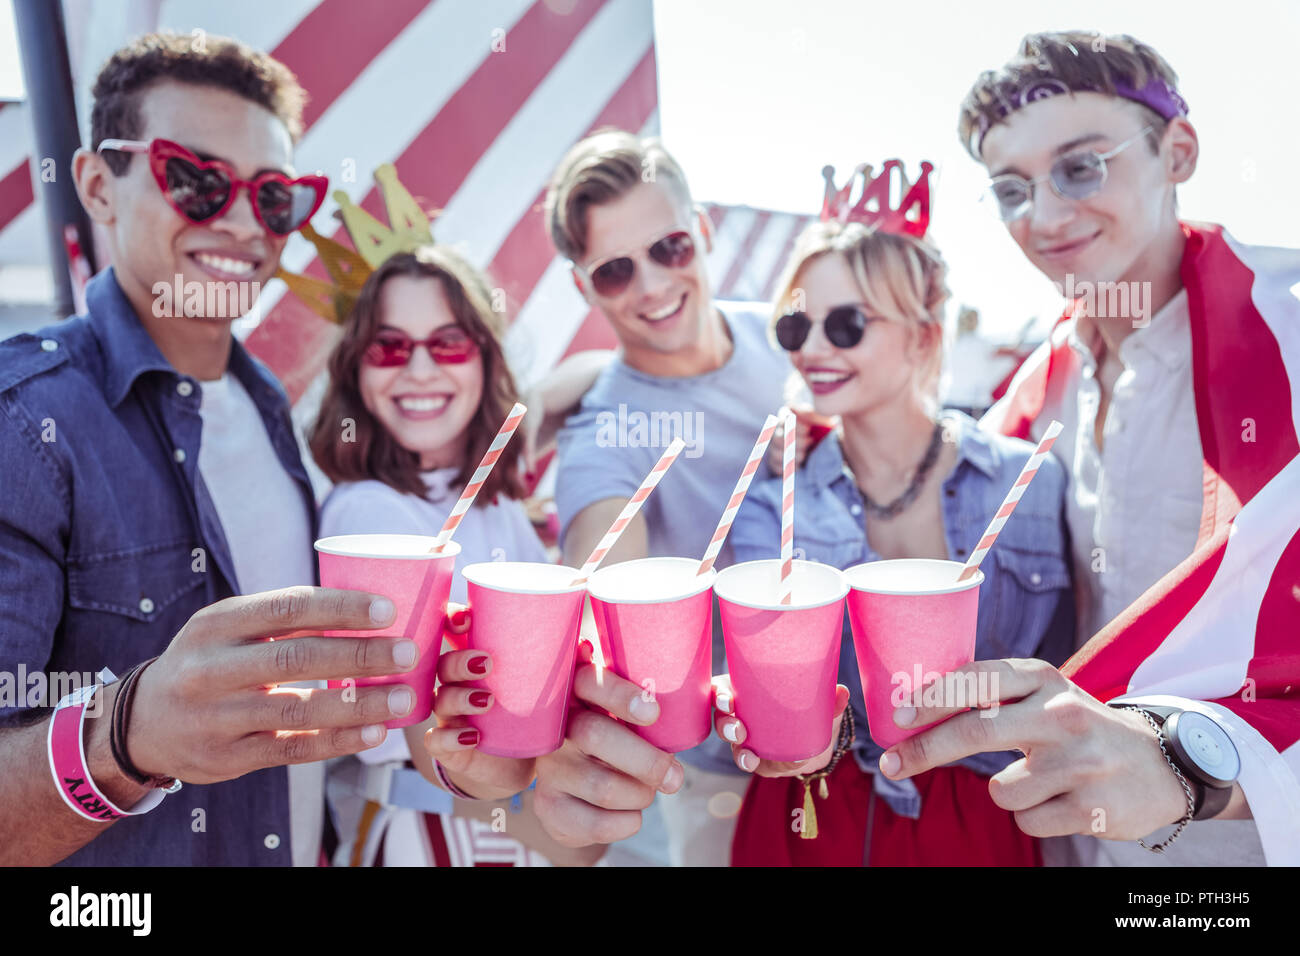 Cheerful mulatto man visiting party with friends Stock Photo